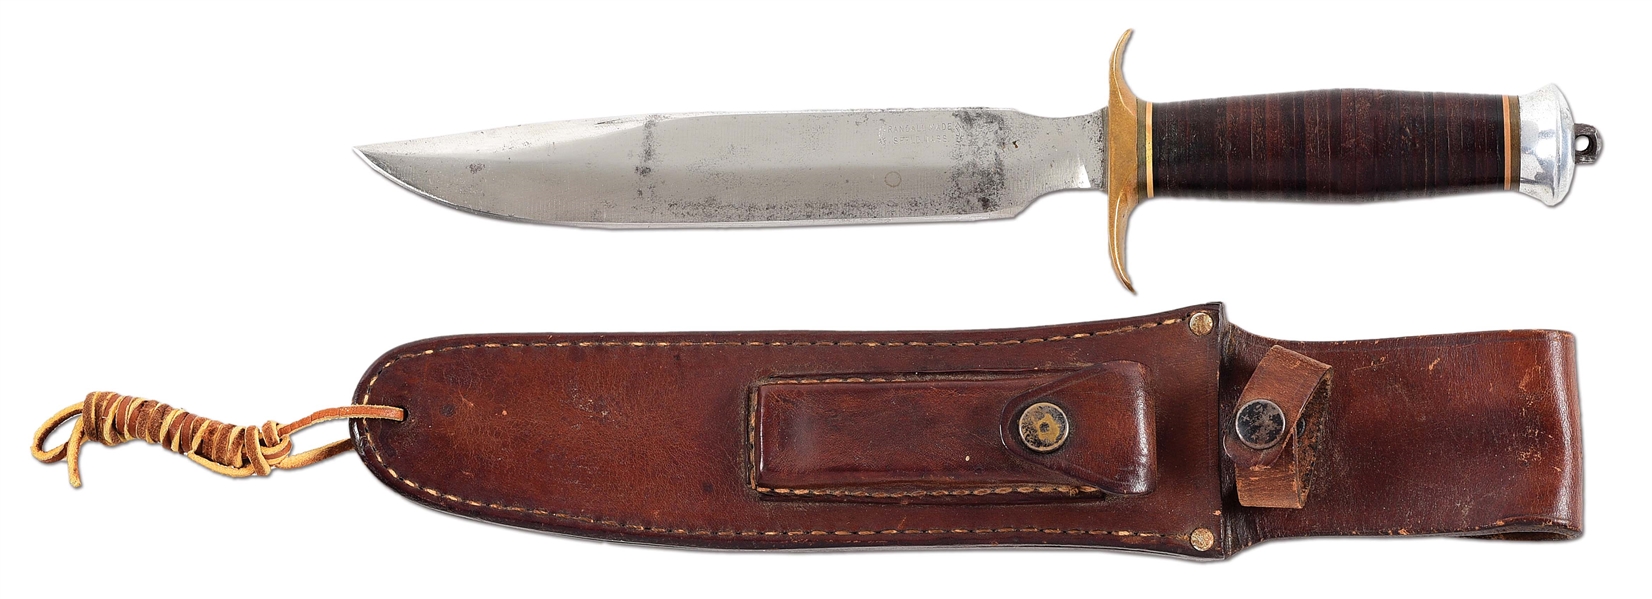 EARLY WWII SPRINGFIELD RANDALL MODEL 1 FIGHTING KNIFE IN LEATHER SCABBARD WITH SHARPENING STONE.